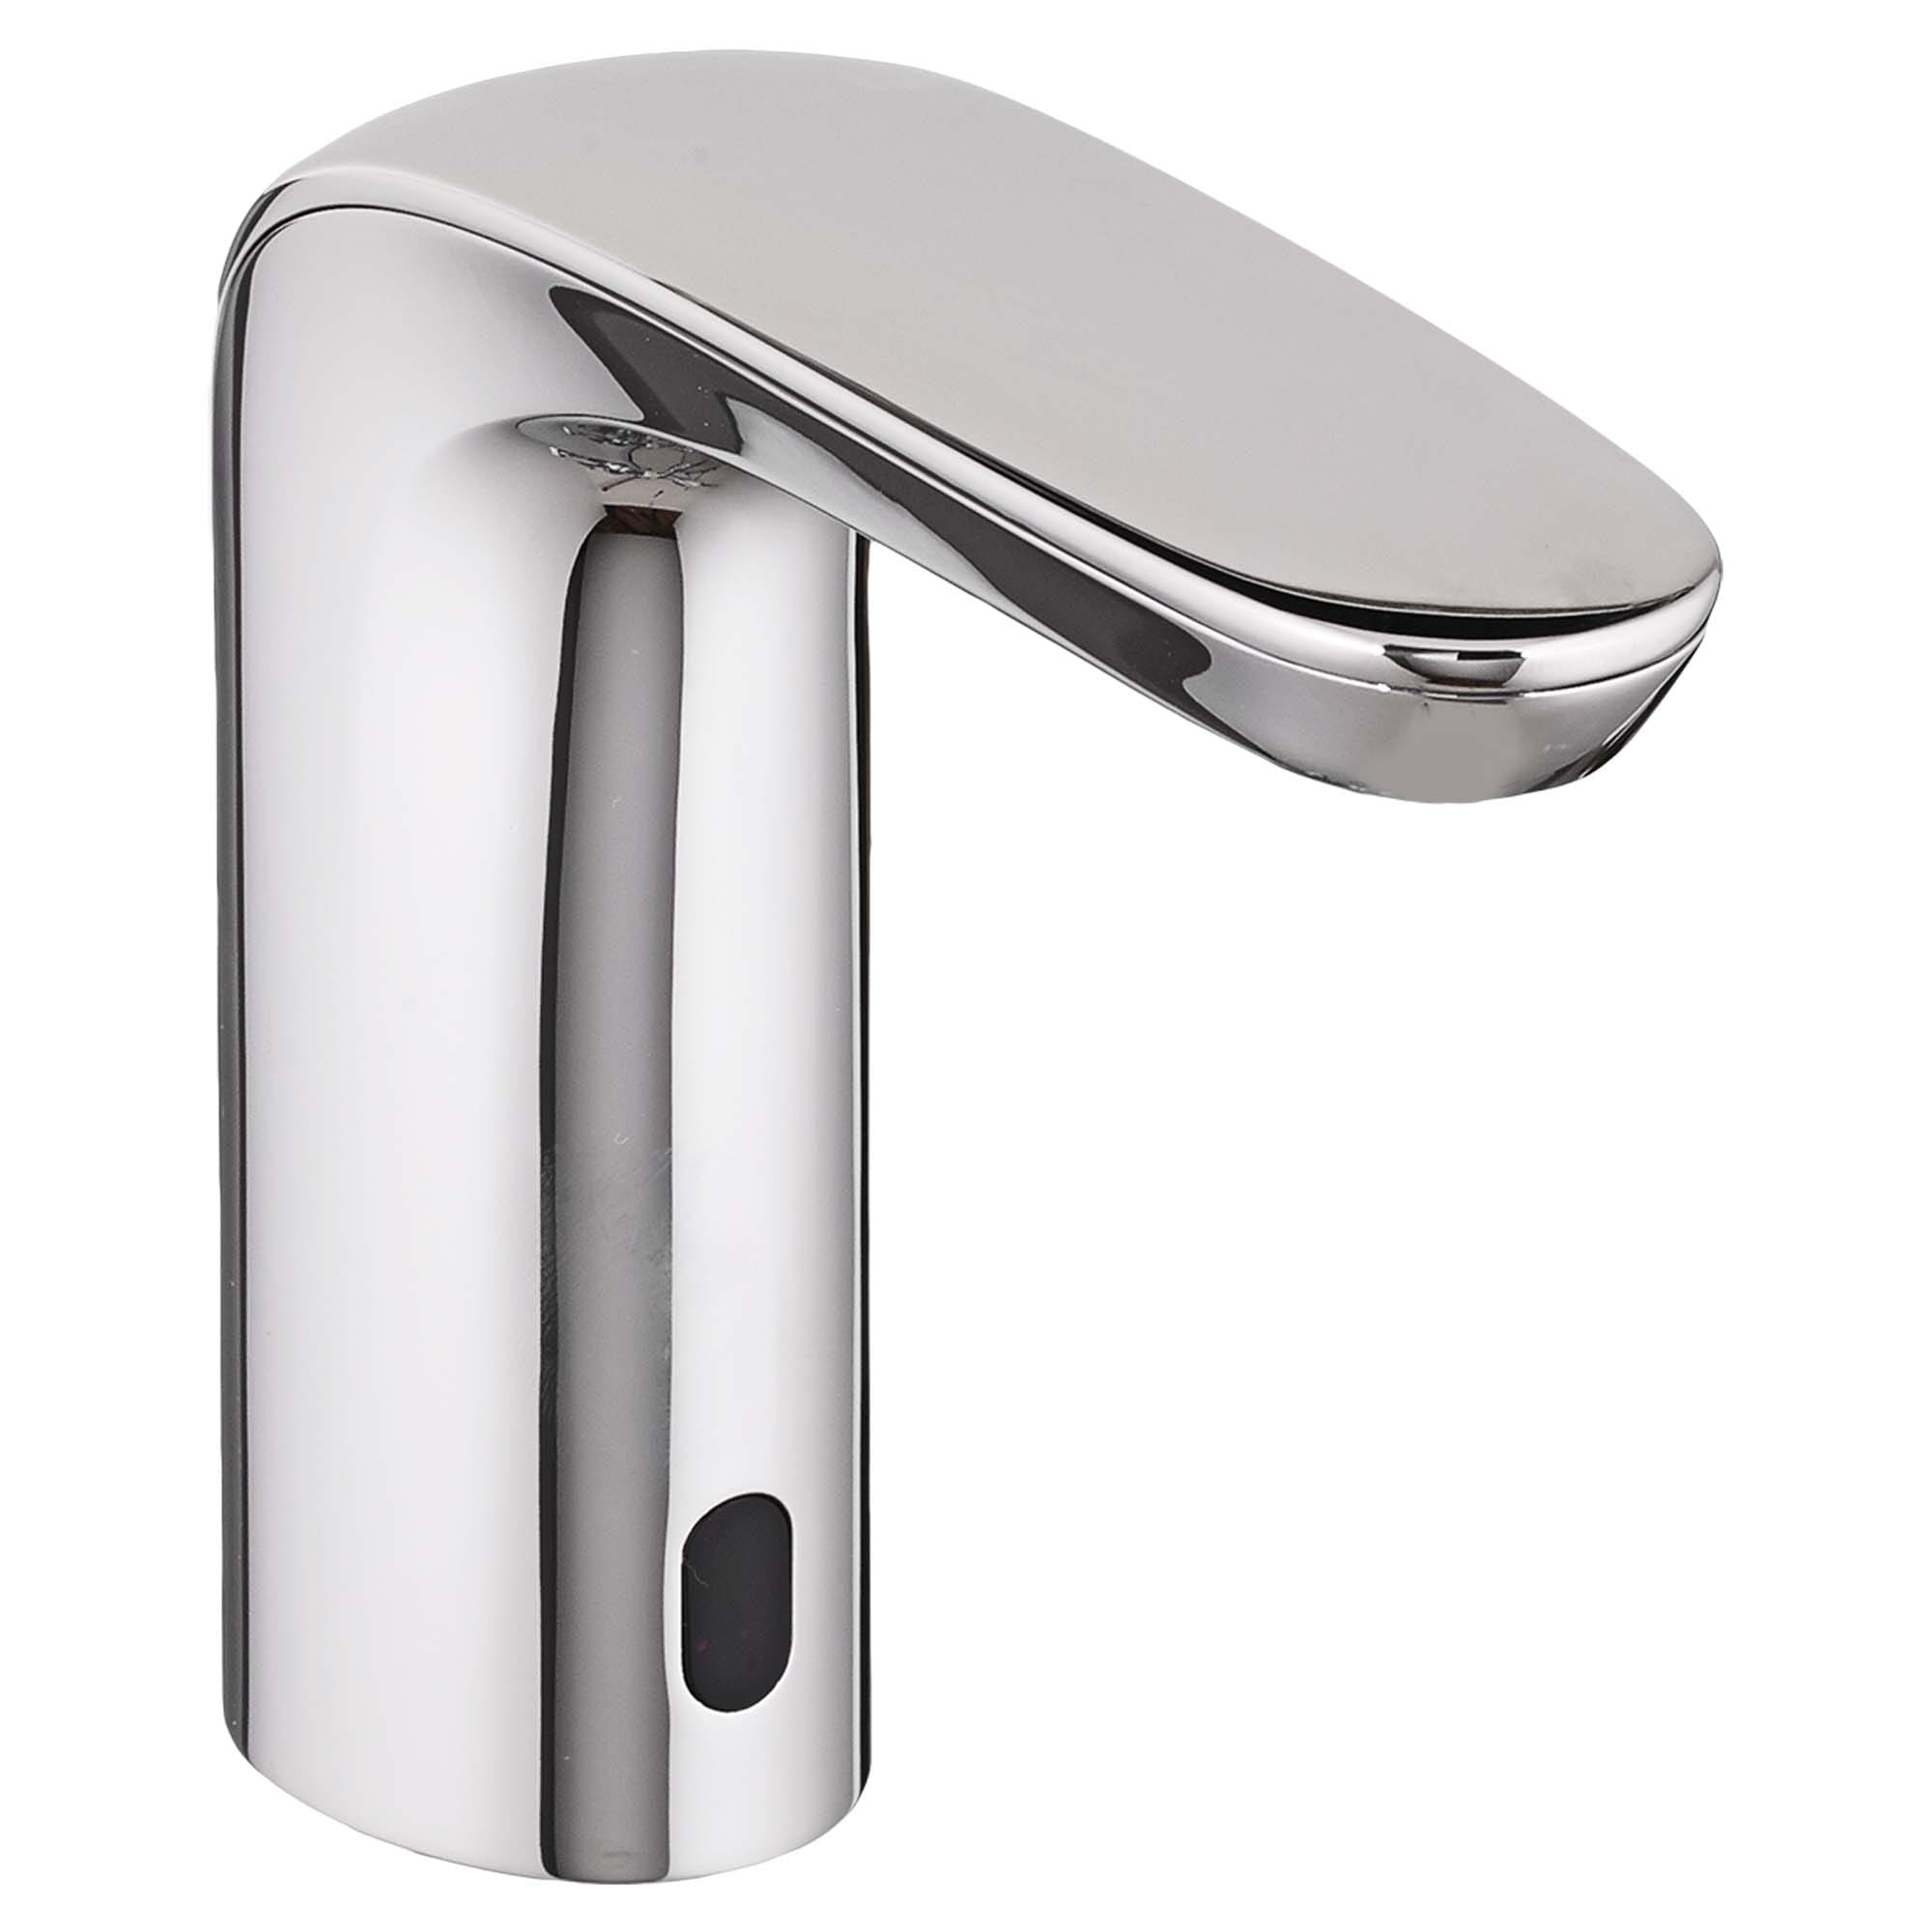 NextGen Selectronic Touchless Faucet Battery Powered 035 gpm 13 Lpm   BRUSHED NICKEL